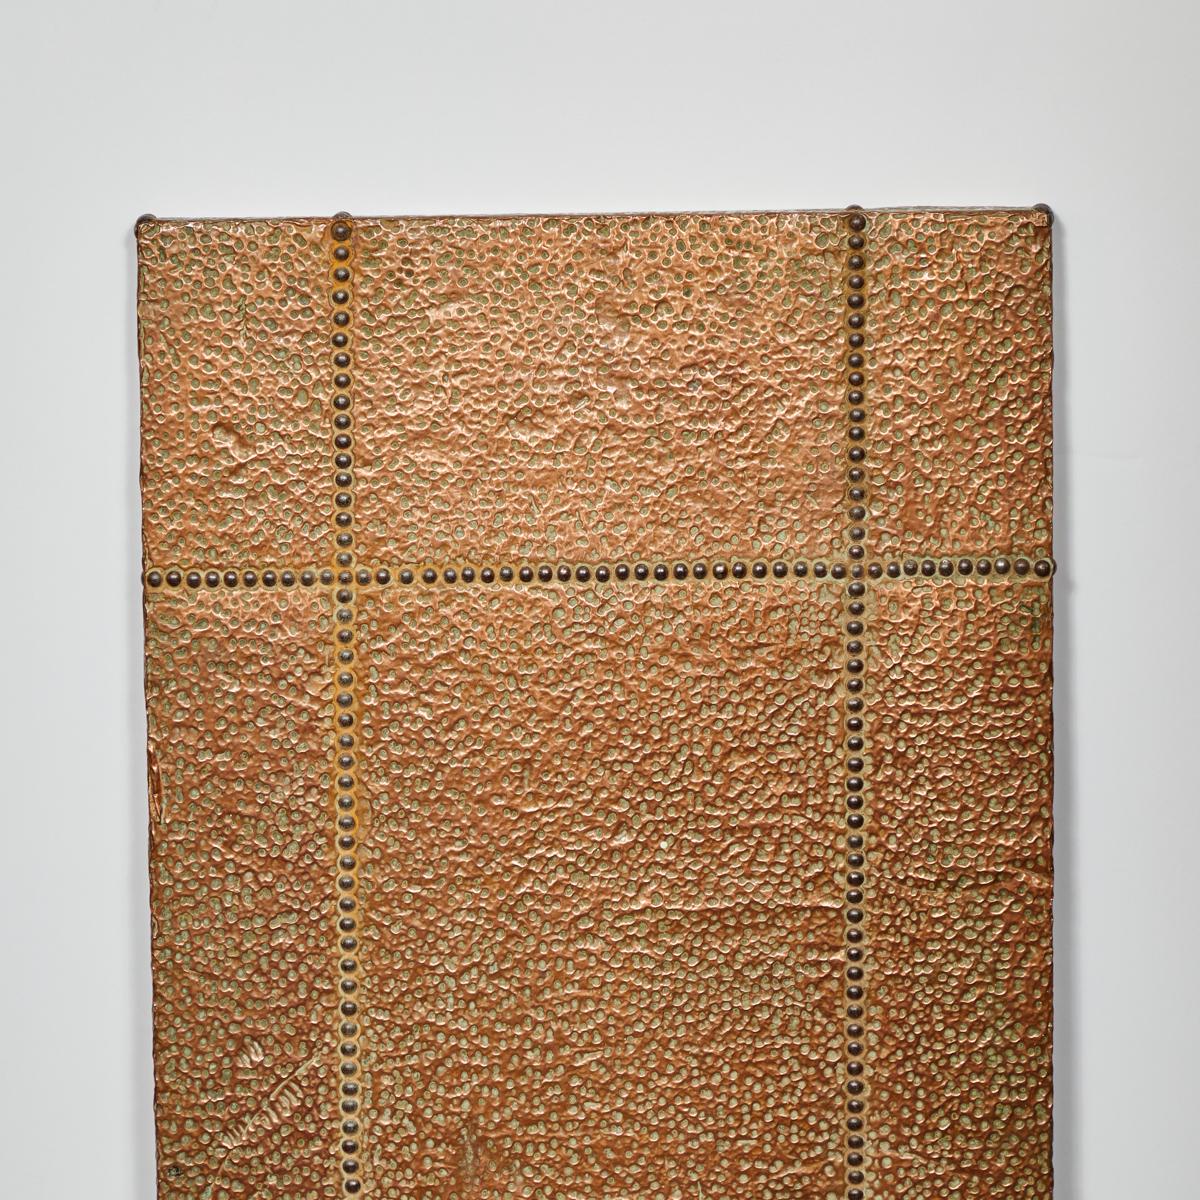 French mid-century highly textured copper and brass riveted panel. A piece of art in its own right, the panel is riddled with a unique copper texture reminiscent of webbing. Stylistically it has shades of art deco and the modernist decorative arts